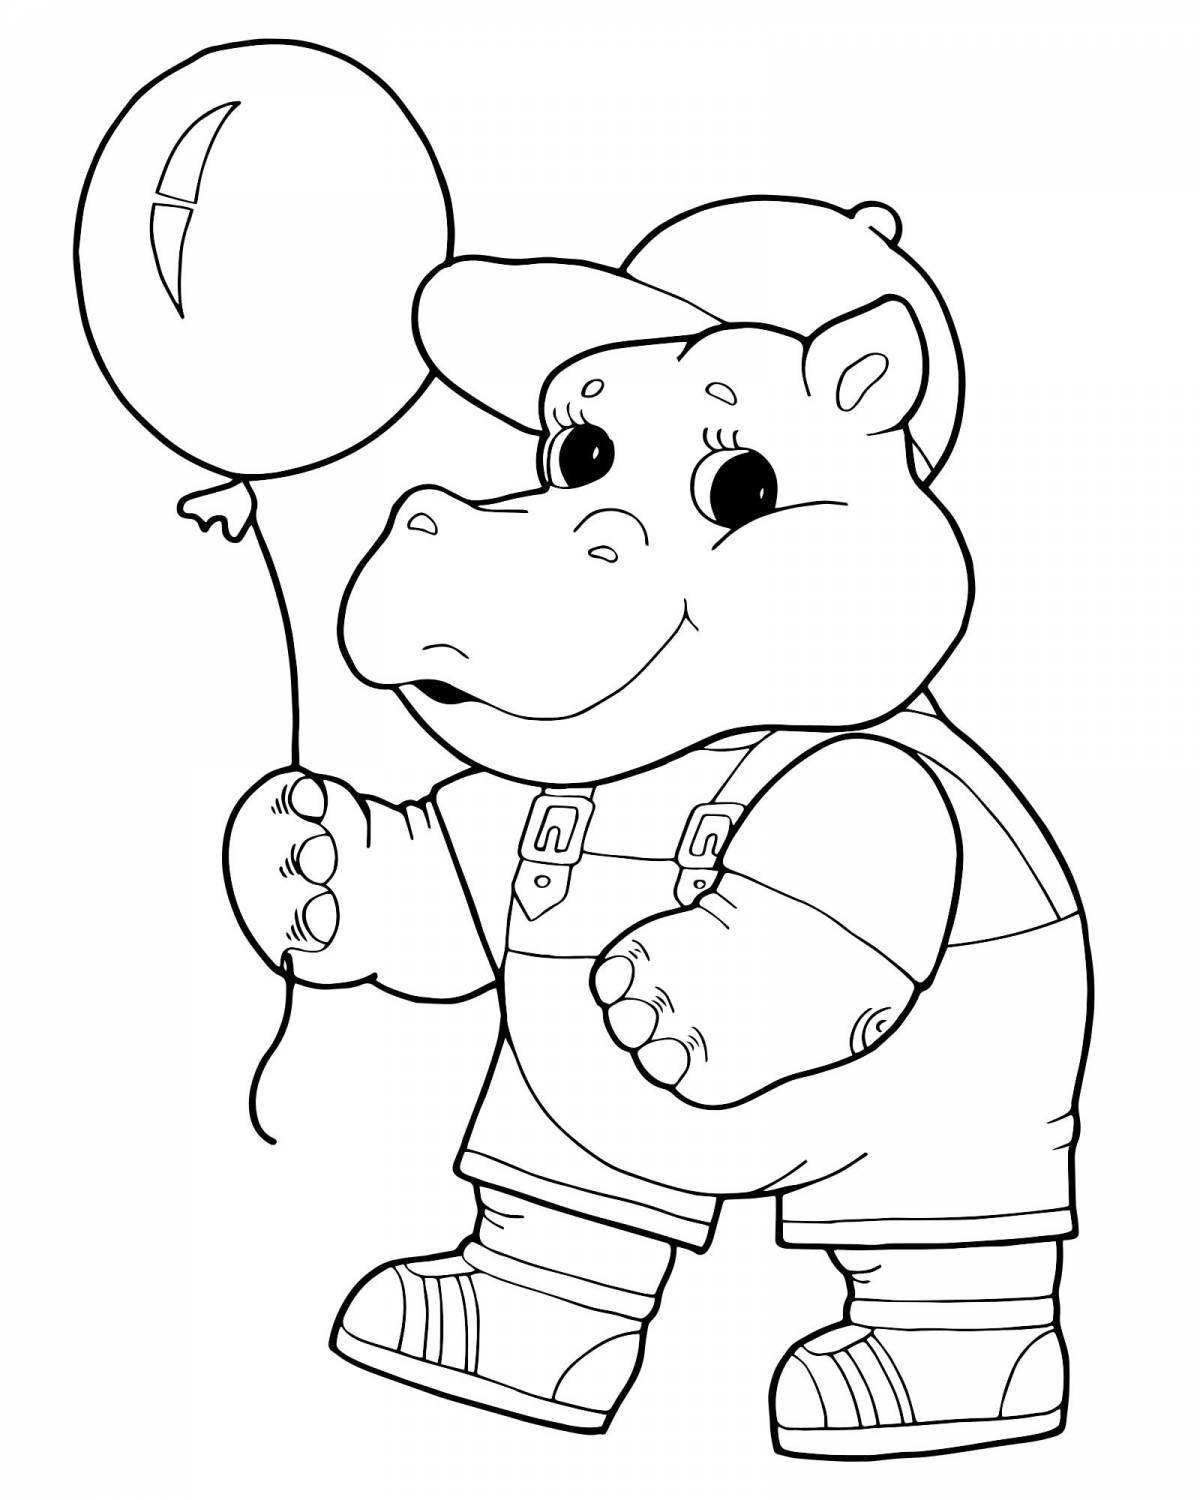 Coloring page happy hippopotamus for children 3-4 years old